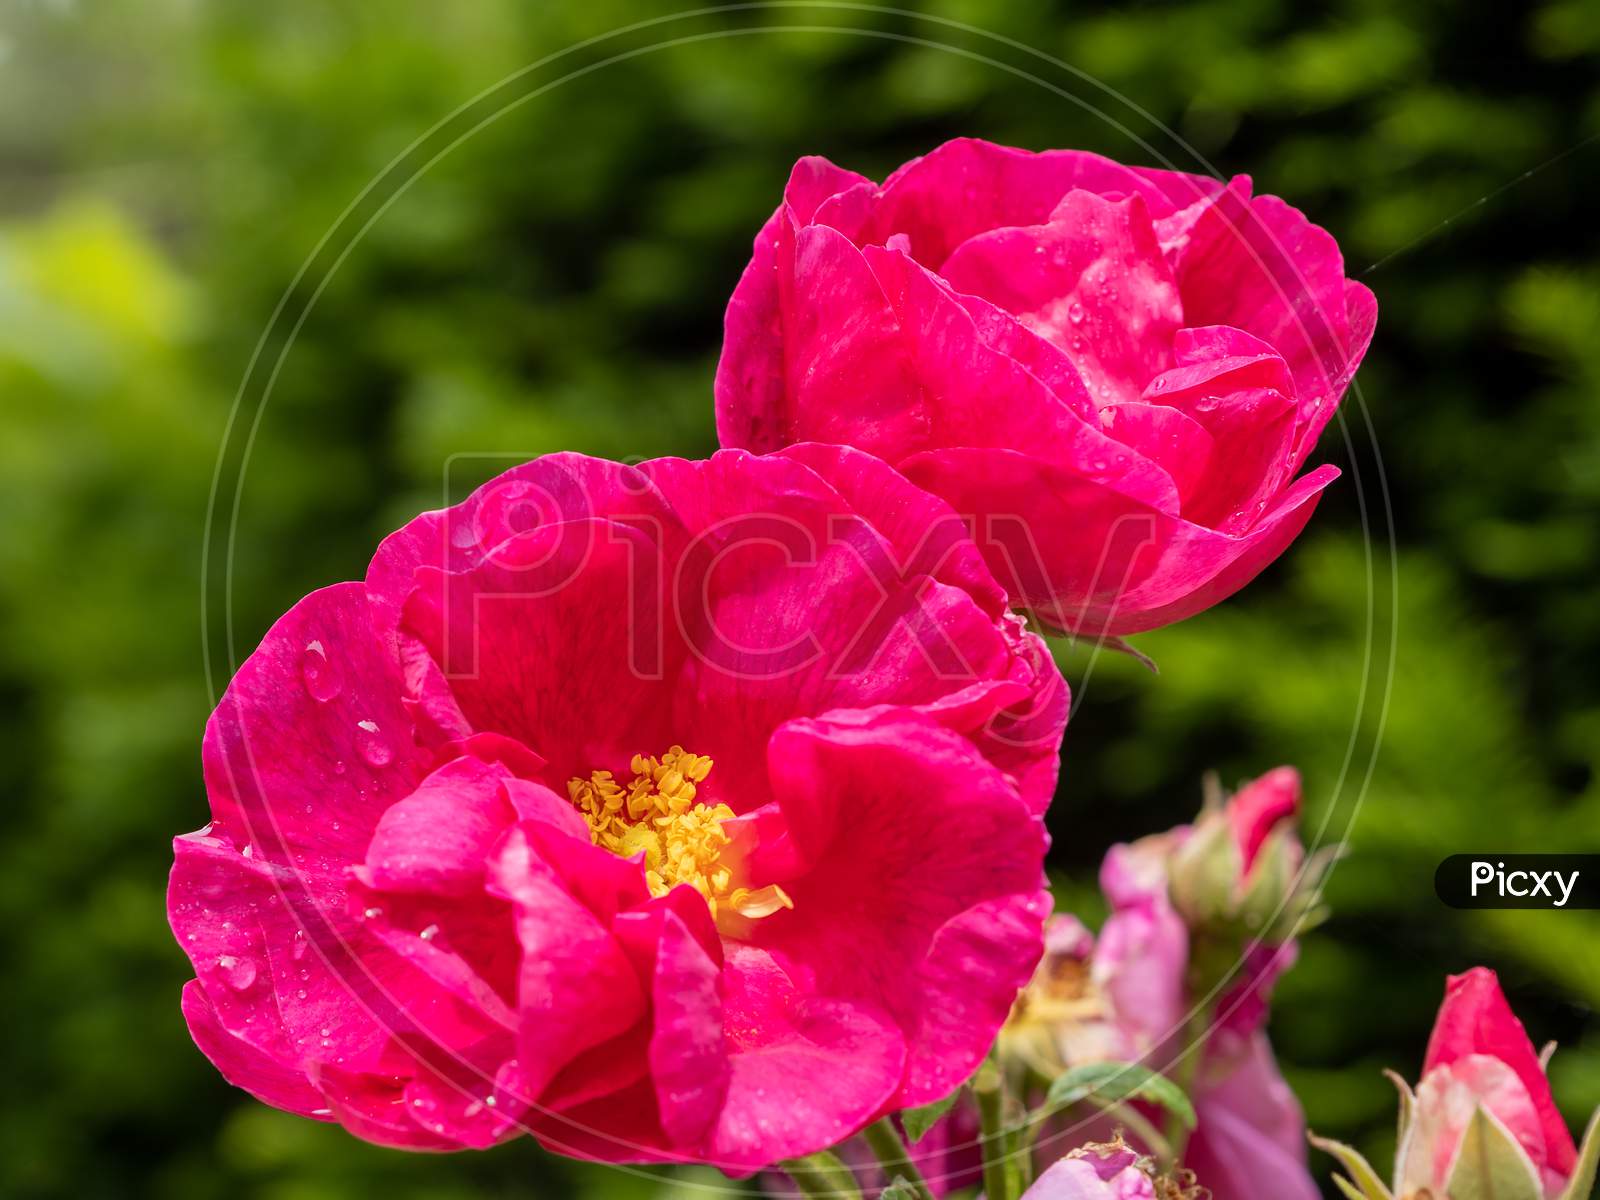 Raindrops On A Cultivated Ornamental Dog Rose Flowering In Summertime